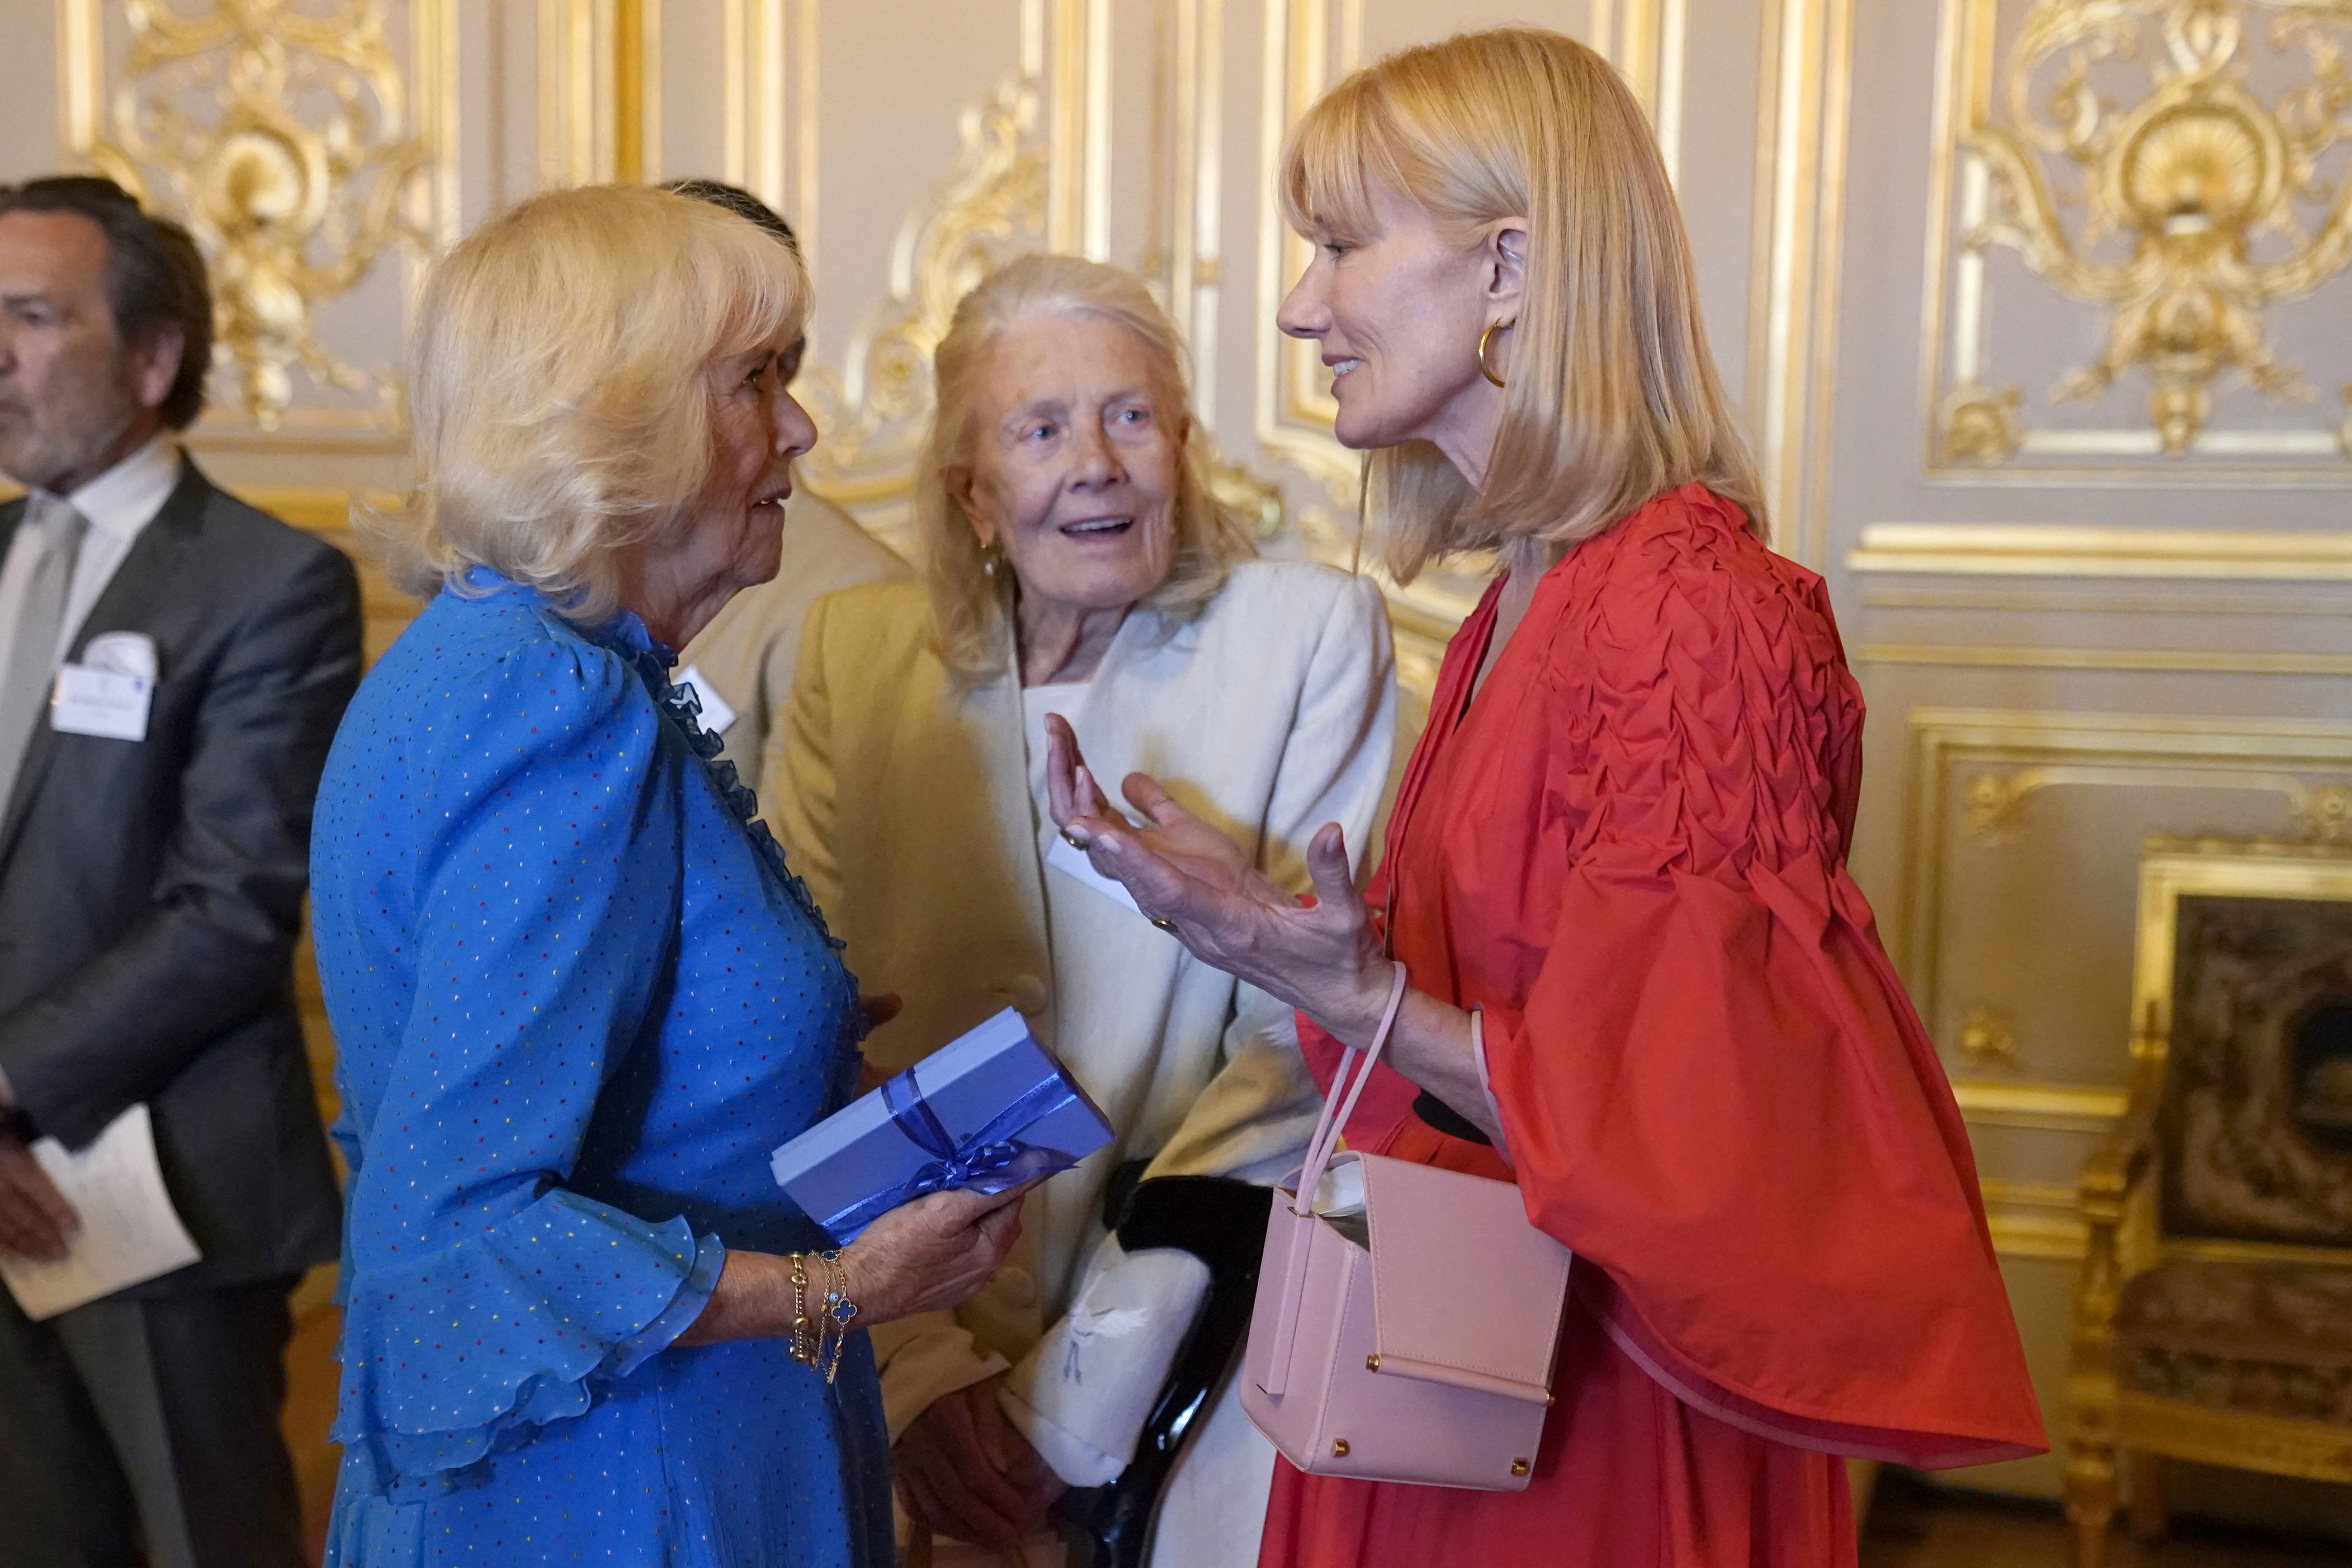 <p>Queen Camilla met with actresses Vanessa Redgrave and Joely Richardson, who hail from a famed British acting family, during a reception at Windsor Castle in WIndsor, England, on July 18, 2023, to celebrate the work of William Shakespeare on the 400th anniversary of the publication of the first Shakespeare Folio.</p>